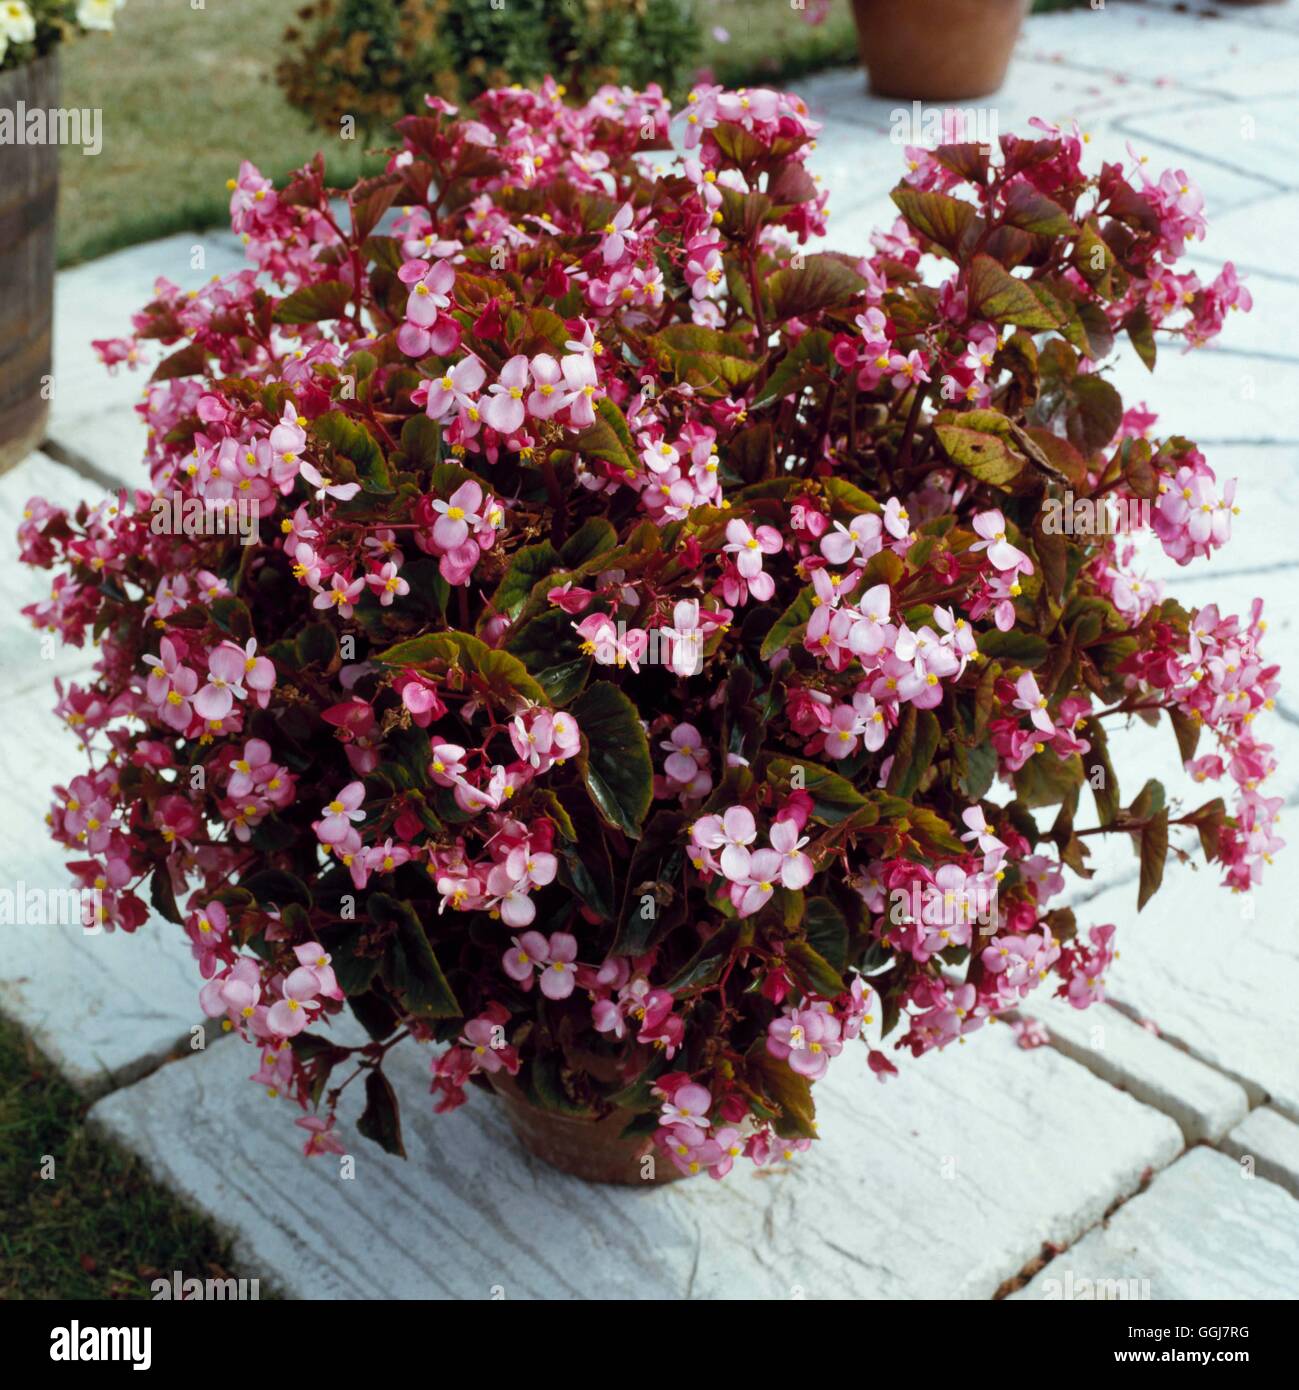 Container - Annual - bepflanzt mit Begonia "Stara" CTR071163 Stockfoto